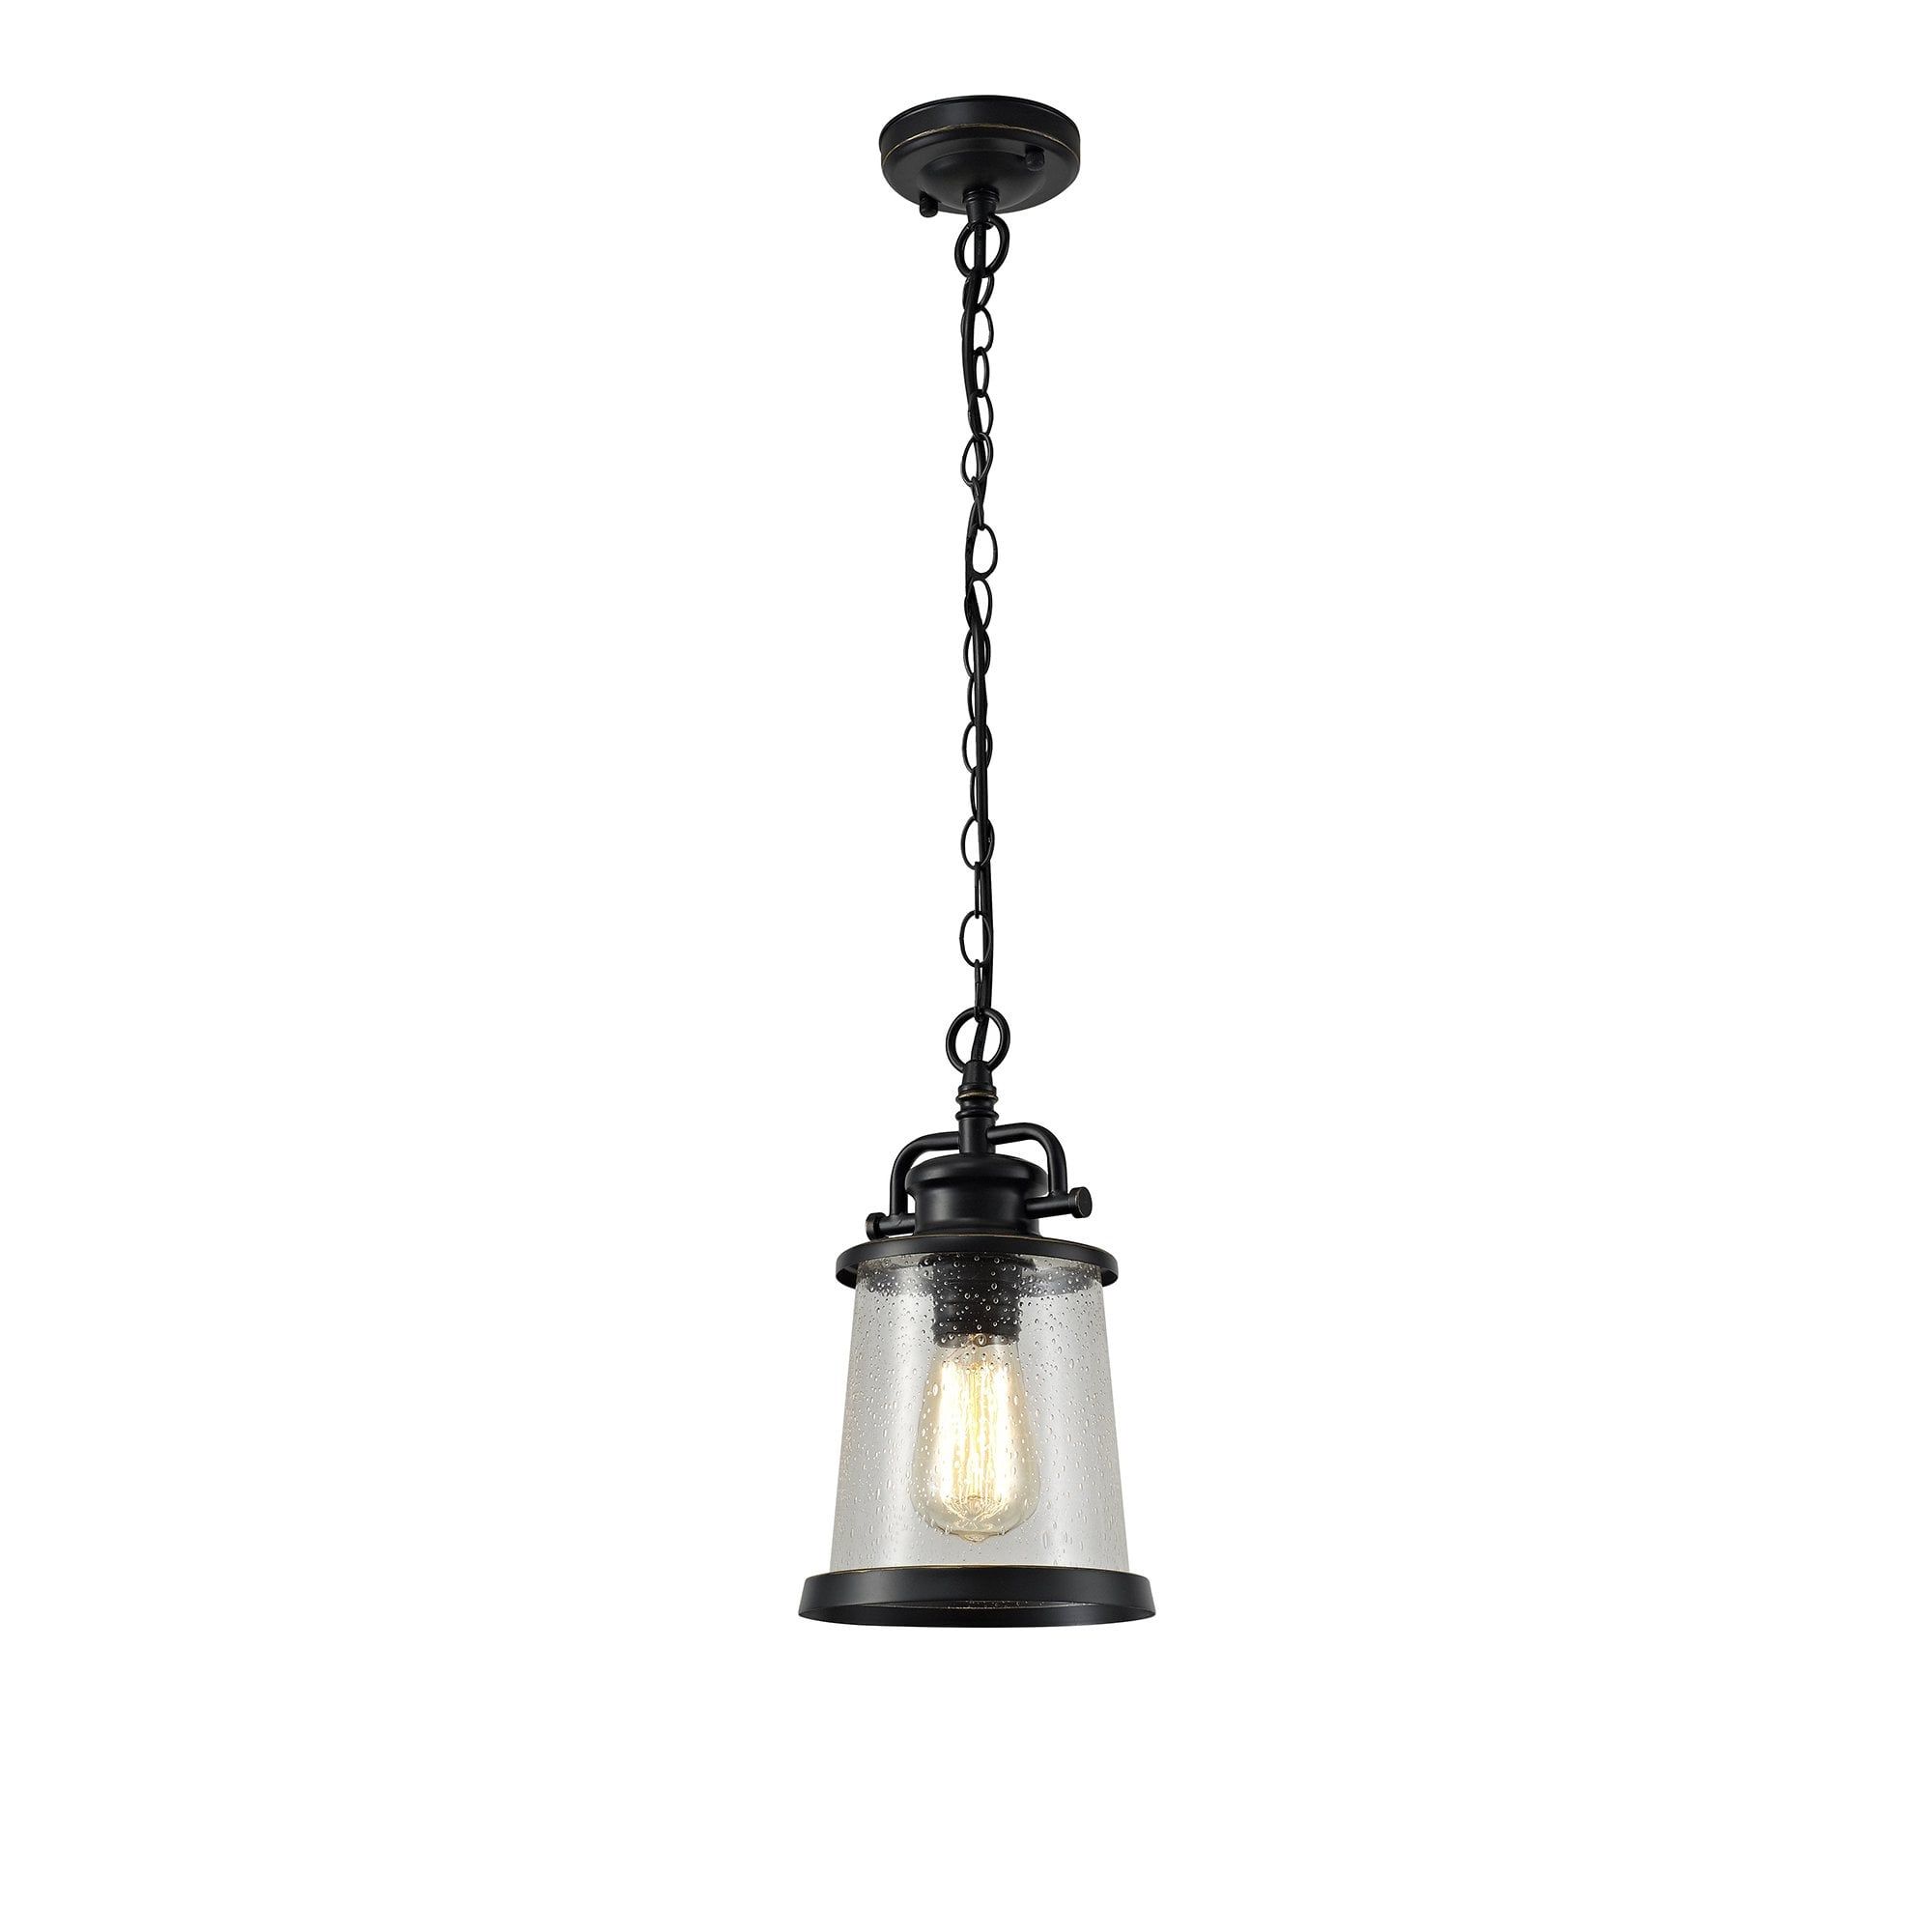 Traditional Outdoor Pendant In Black With Clear Seeded Glass Shade Intended For Well Known Seeded Clear Glass Lantern Chandeliers (View 3 of 10)